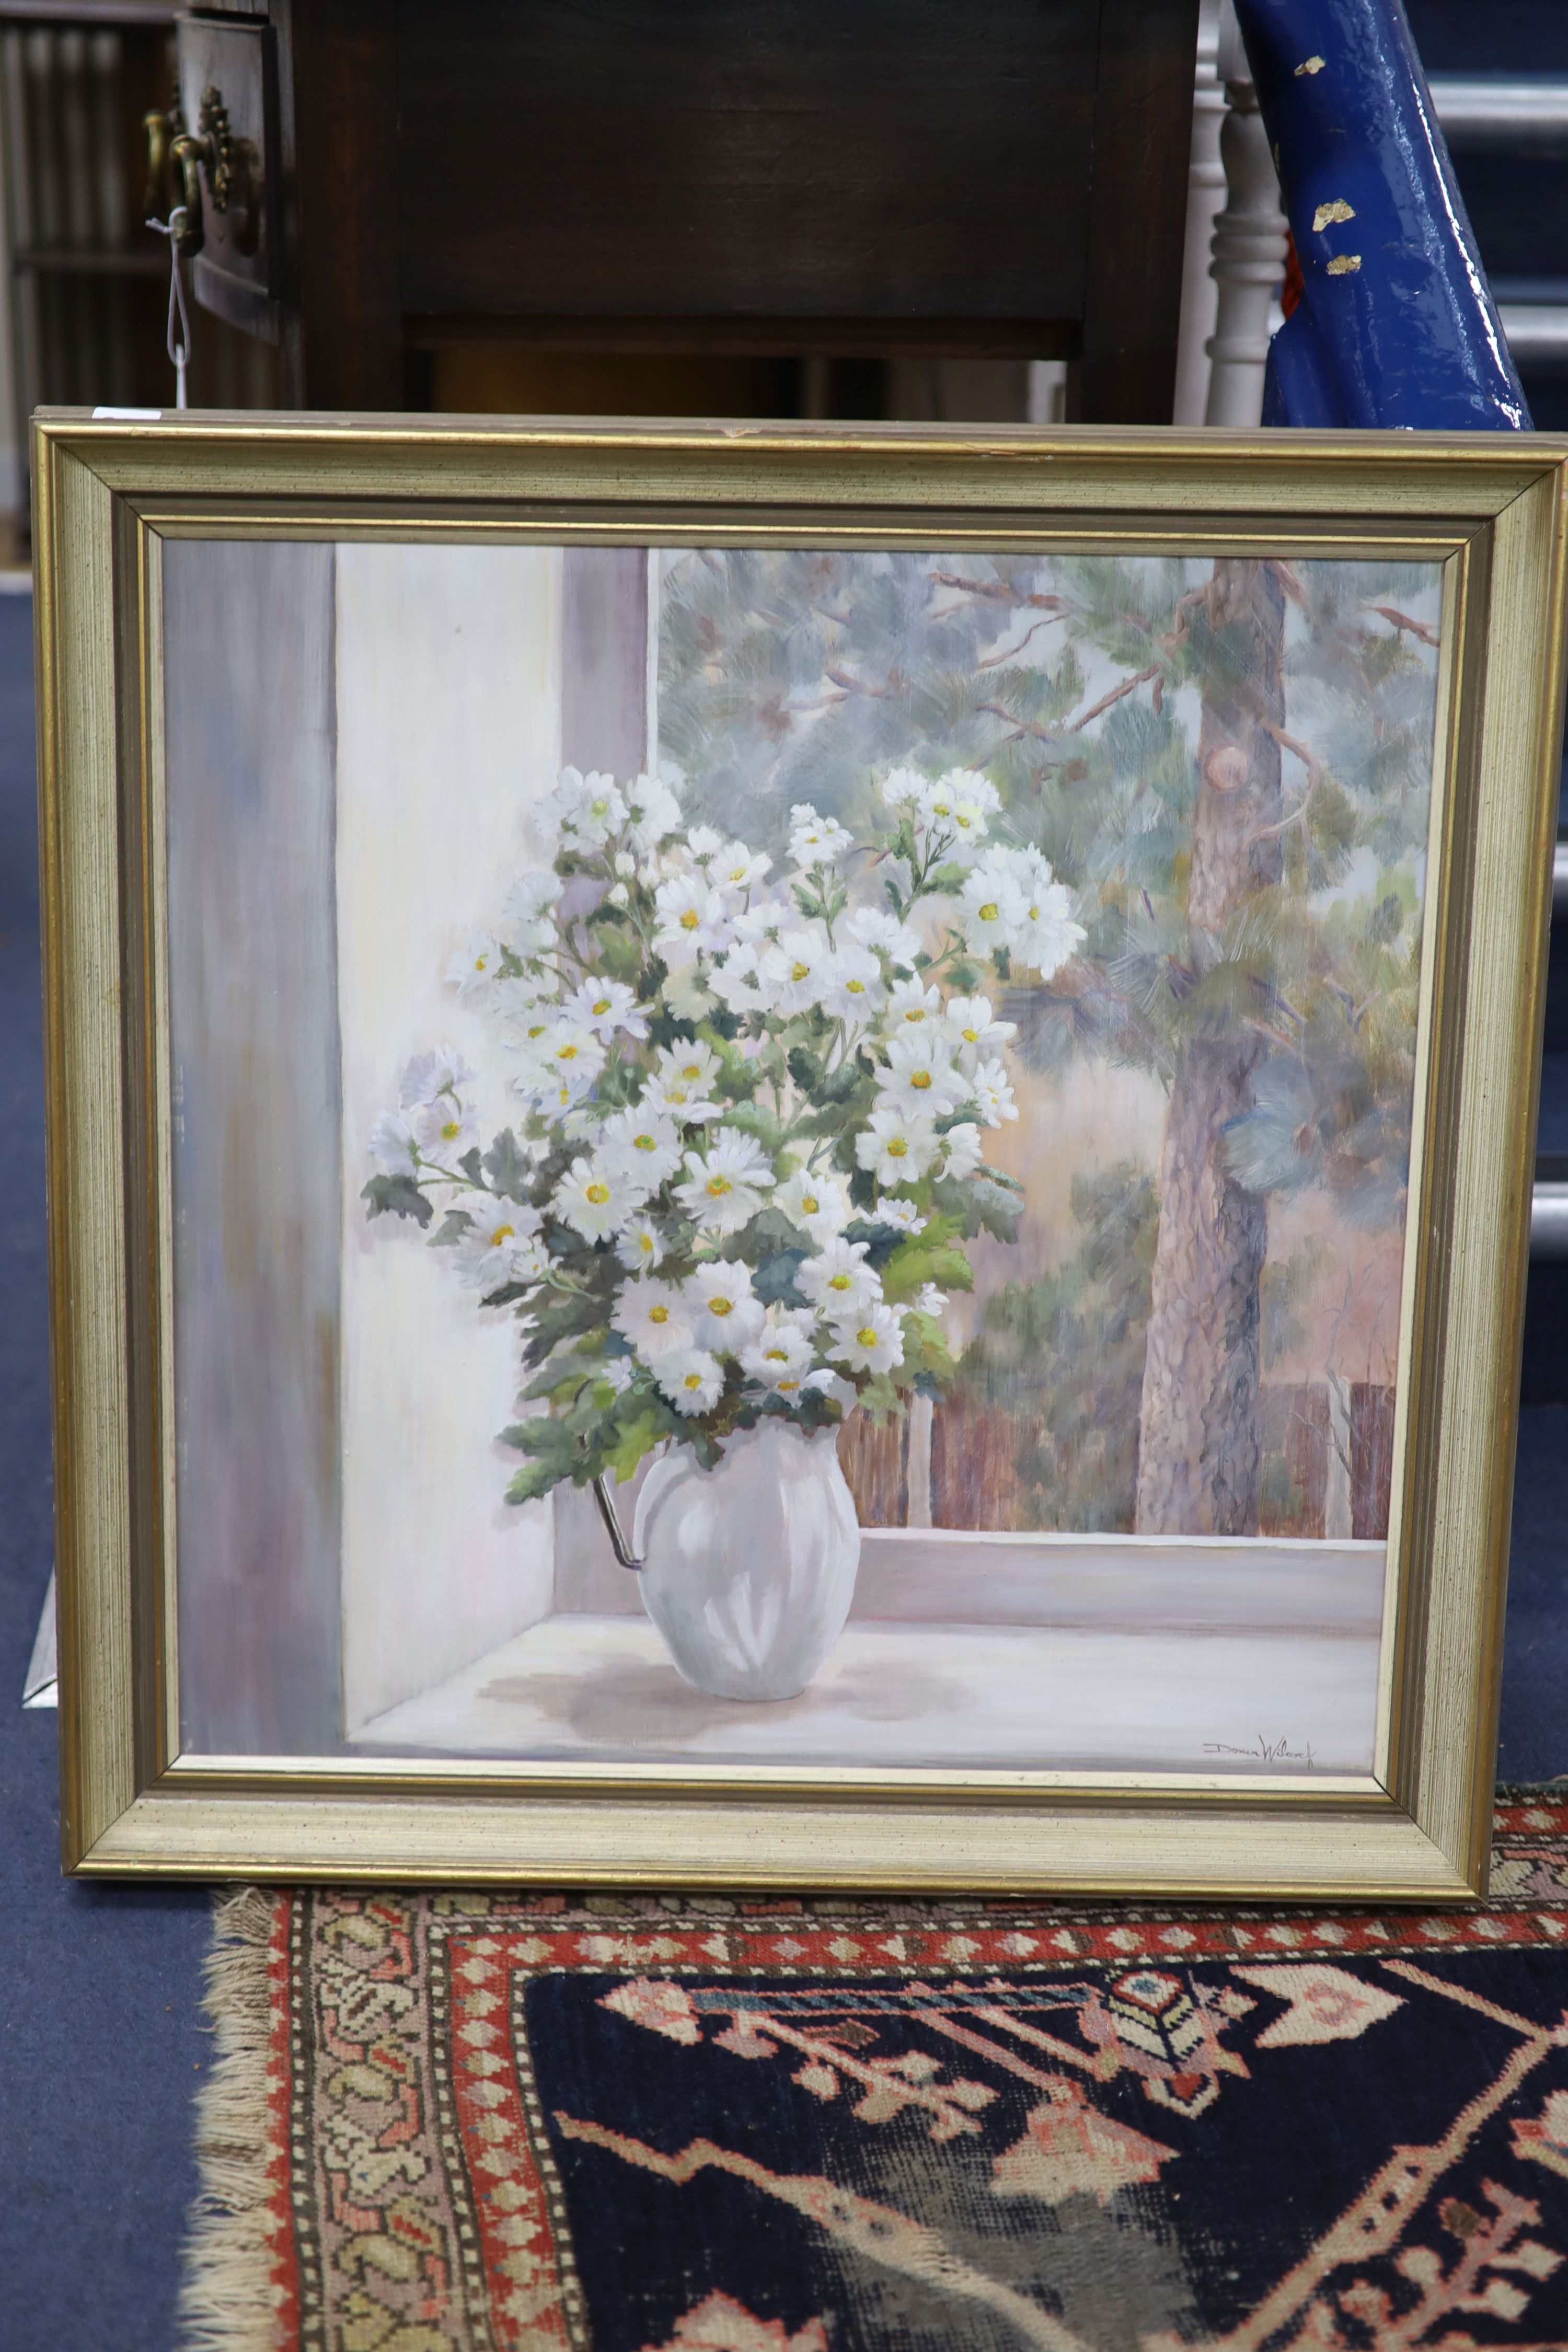 Doreen G. Wilcock SBA, oil on board, 'Study in White', signed with Exhibition label, 59 x 59cm